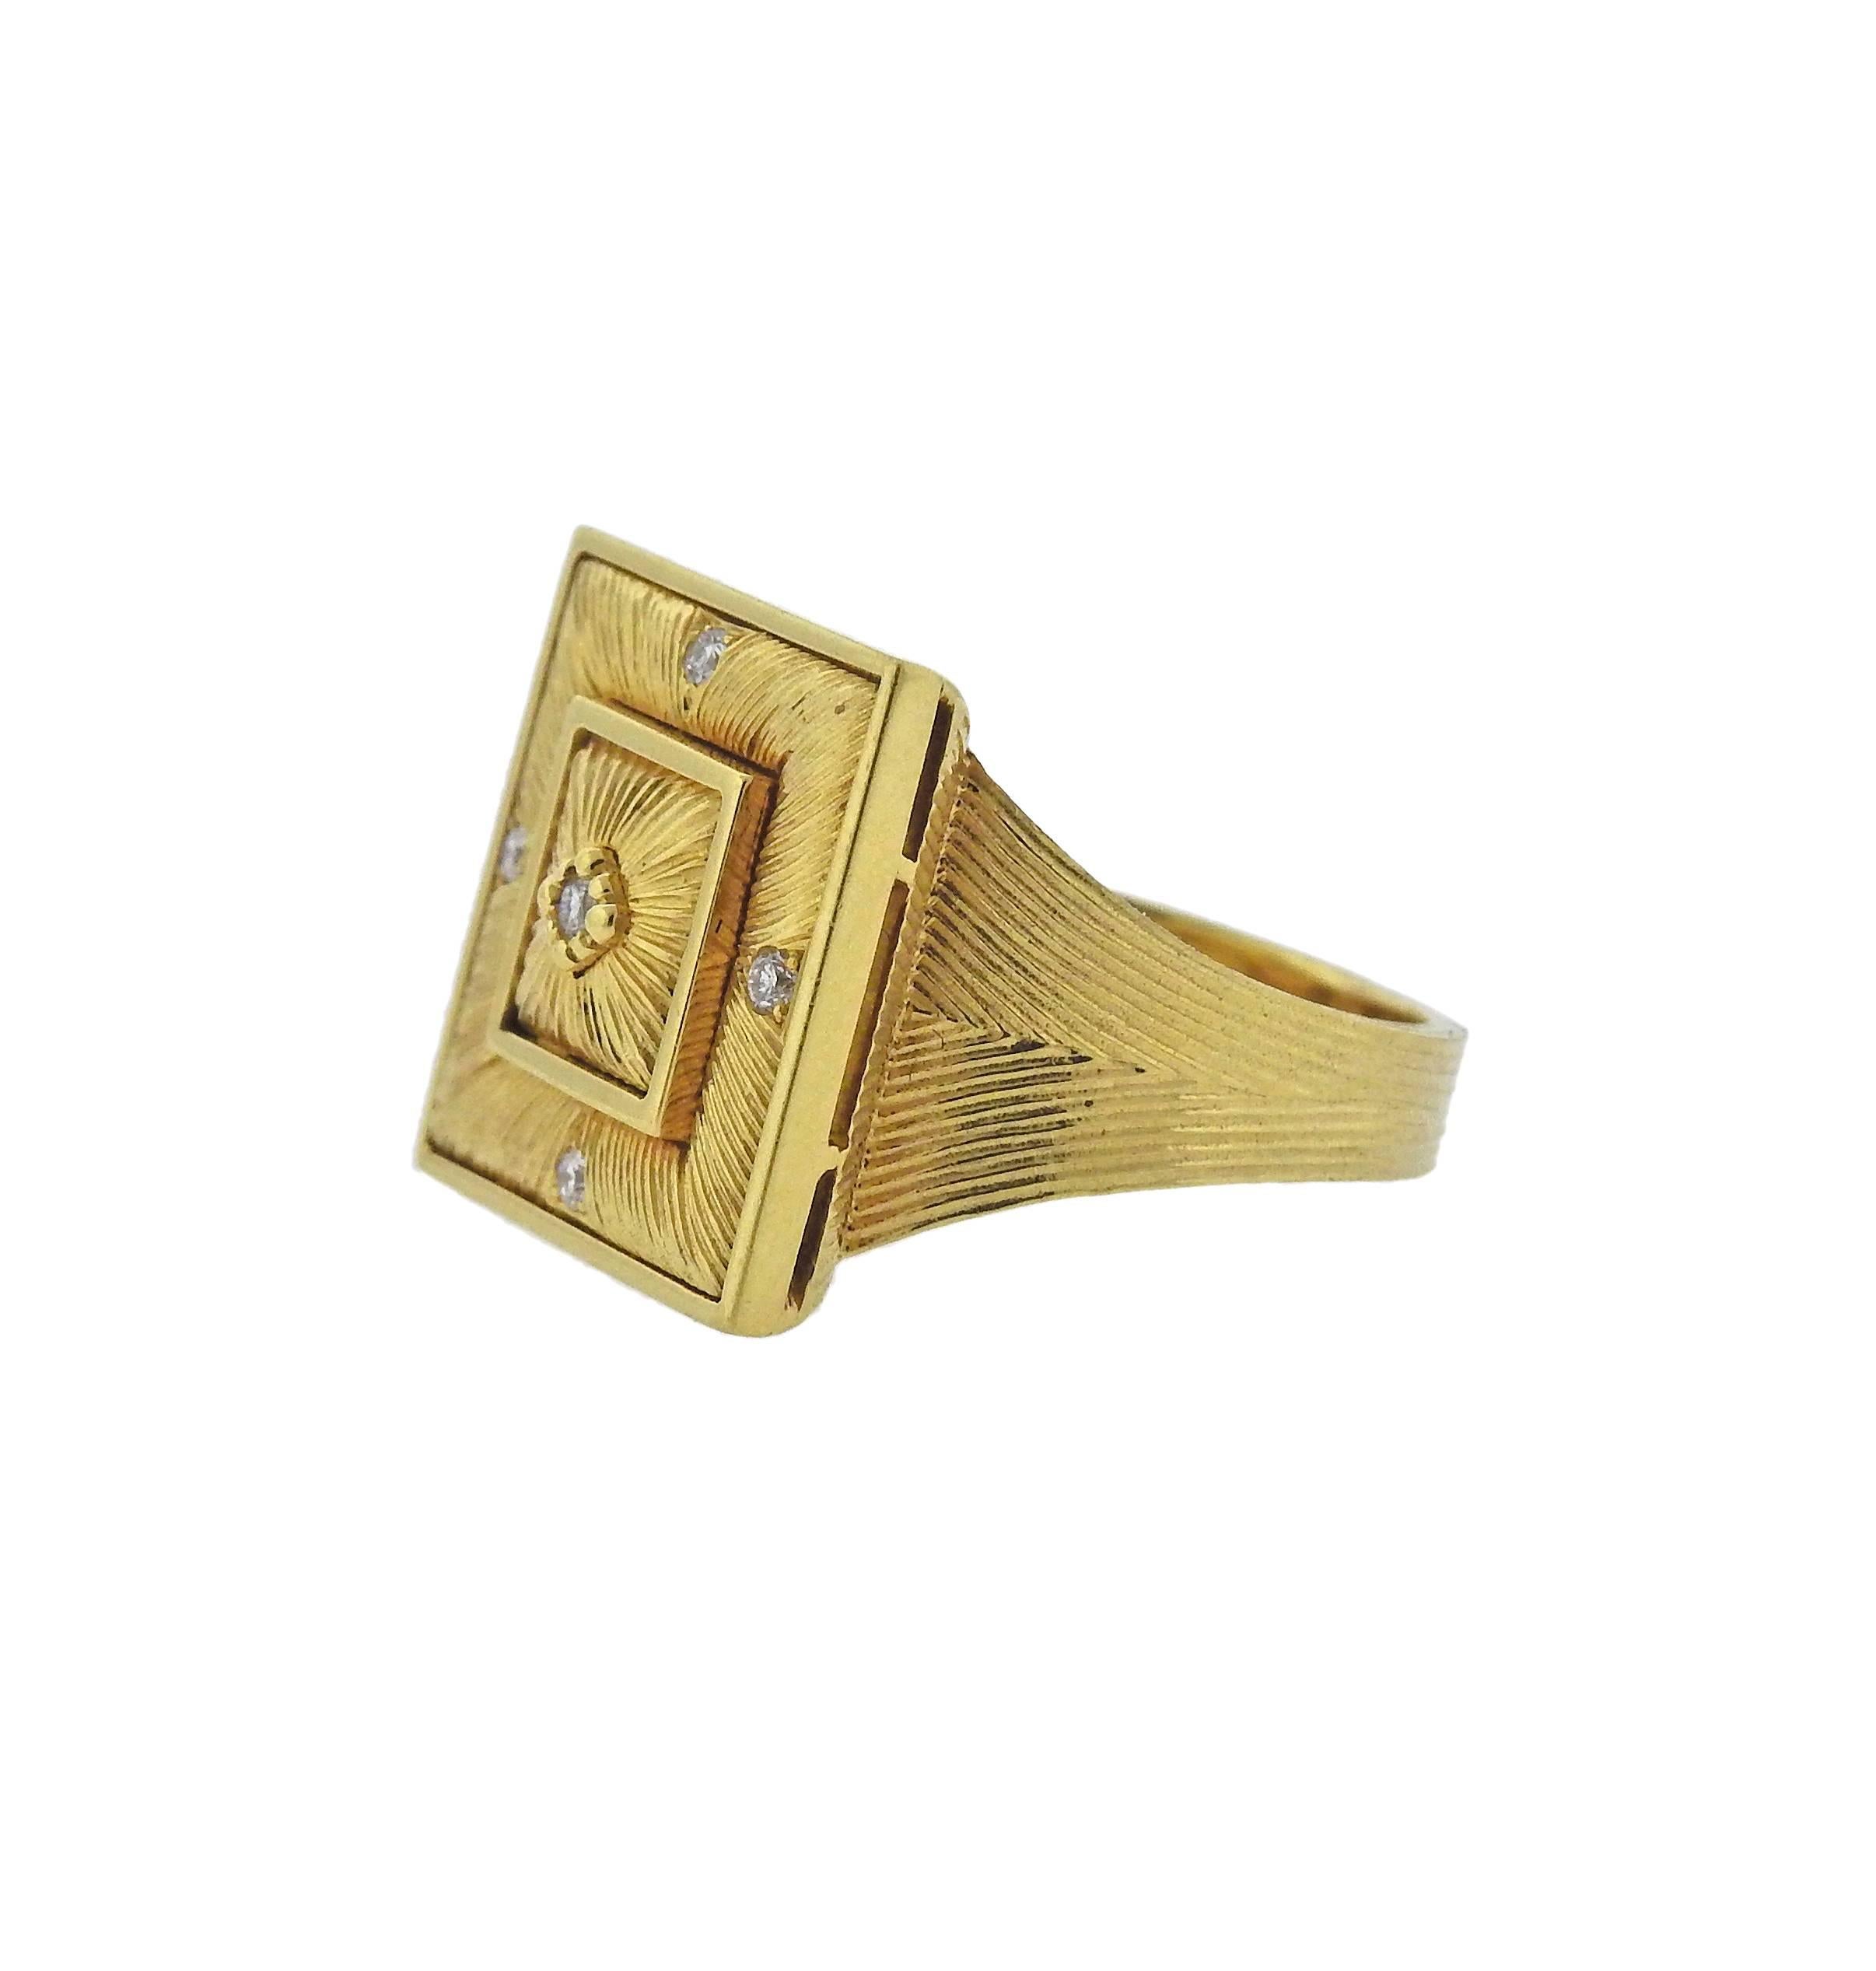 18k yellow gold square top ring, crafted by Buccellati, set with 0.05ctw in G/VS diamonds. Ring size - 5.5, ring top - 15mm x 15mm, weighs 12.8 grams. Marked: 750, A 71, Gianmaria Buccellati .